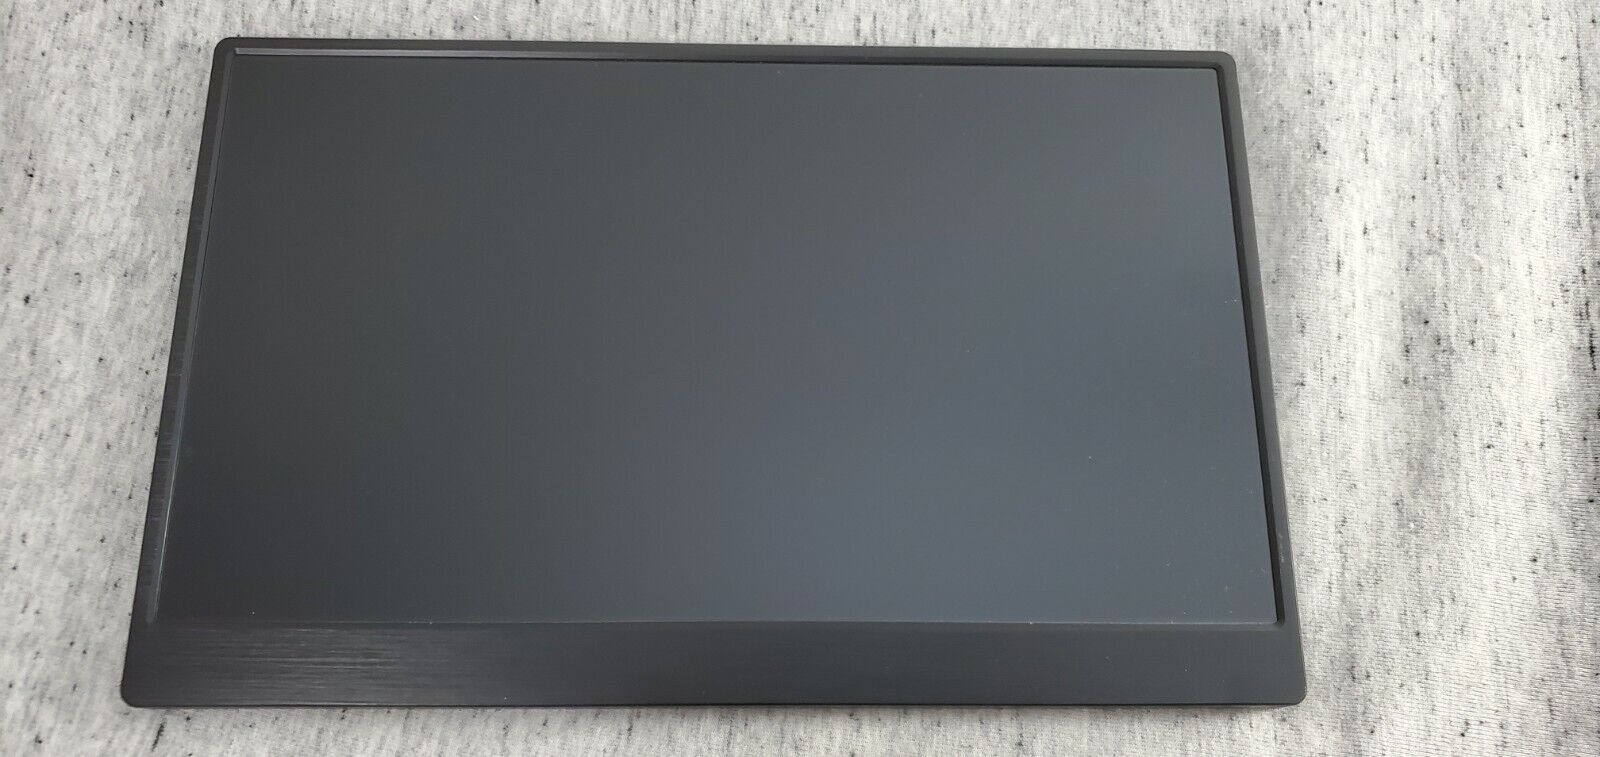 Cocopar 13.3 Inch Portable Monitor (1080p LED Display 16:9)